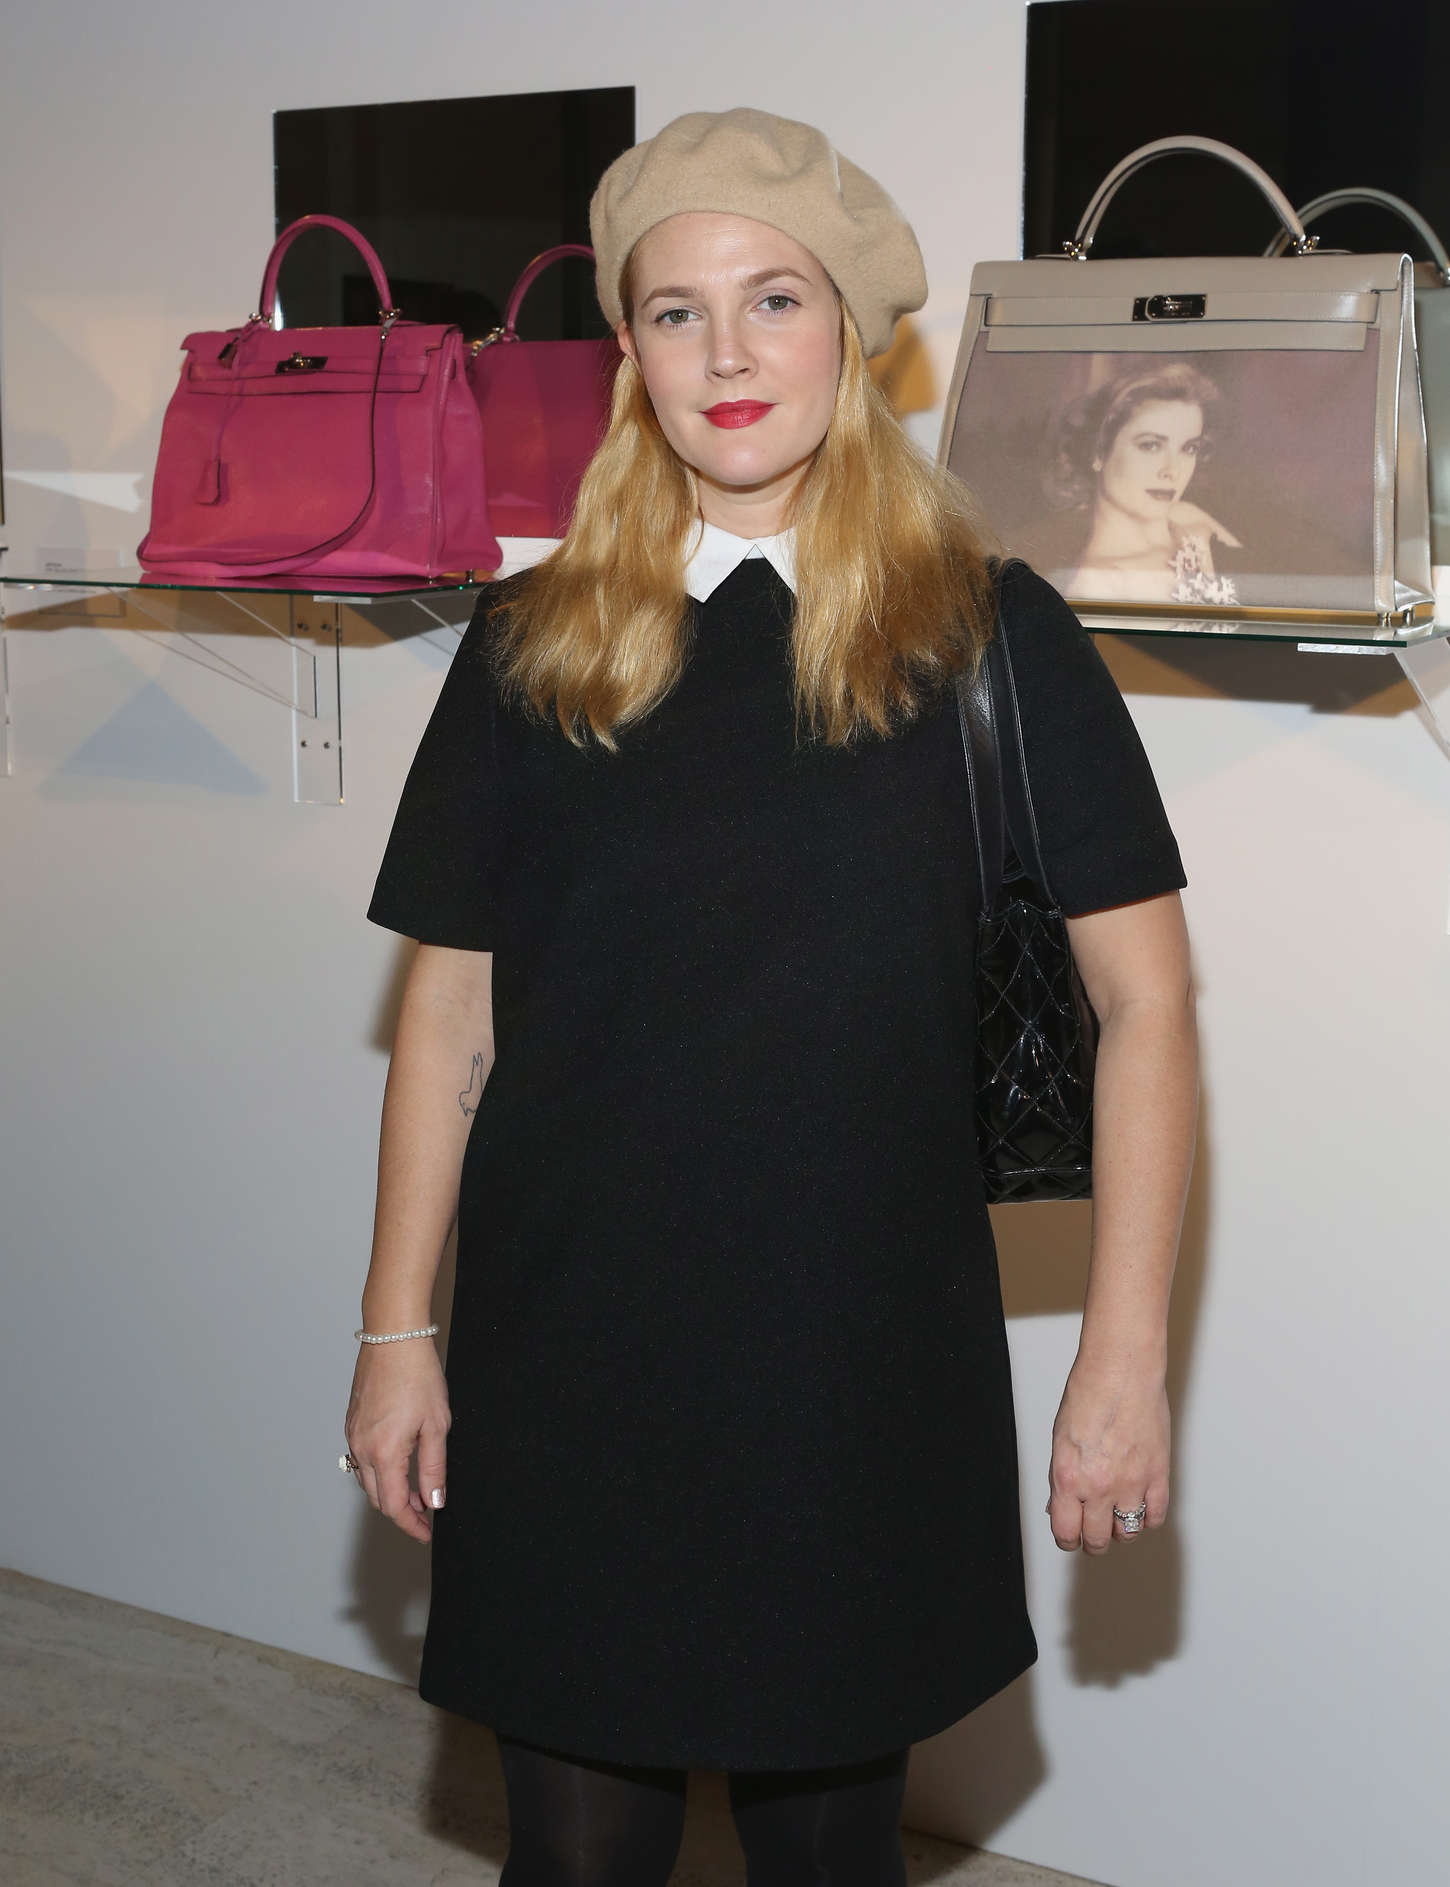 Drew Barrymore - Project Perpetual's Inaugural Auction in NYC